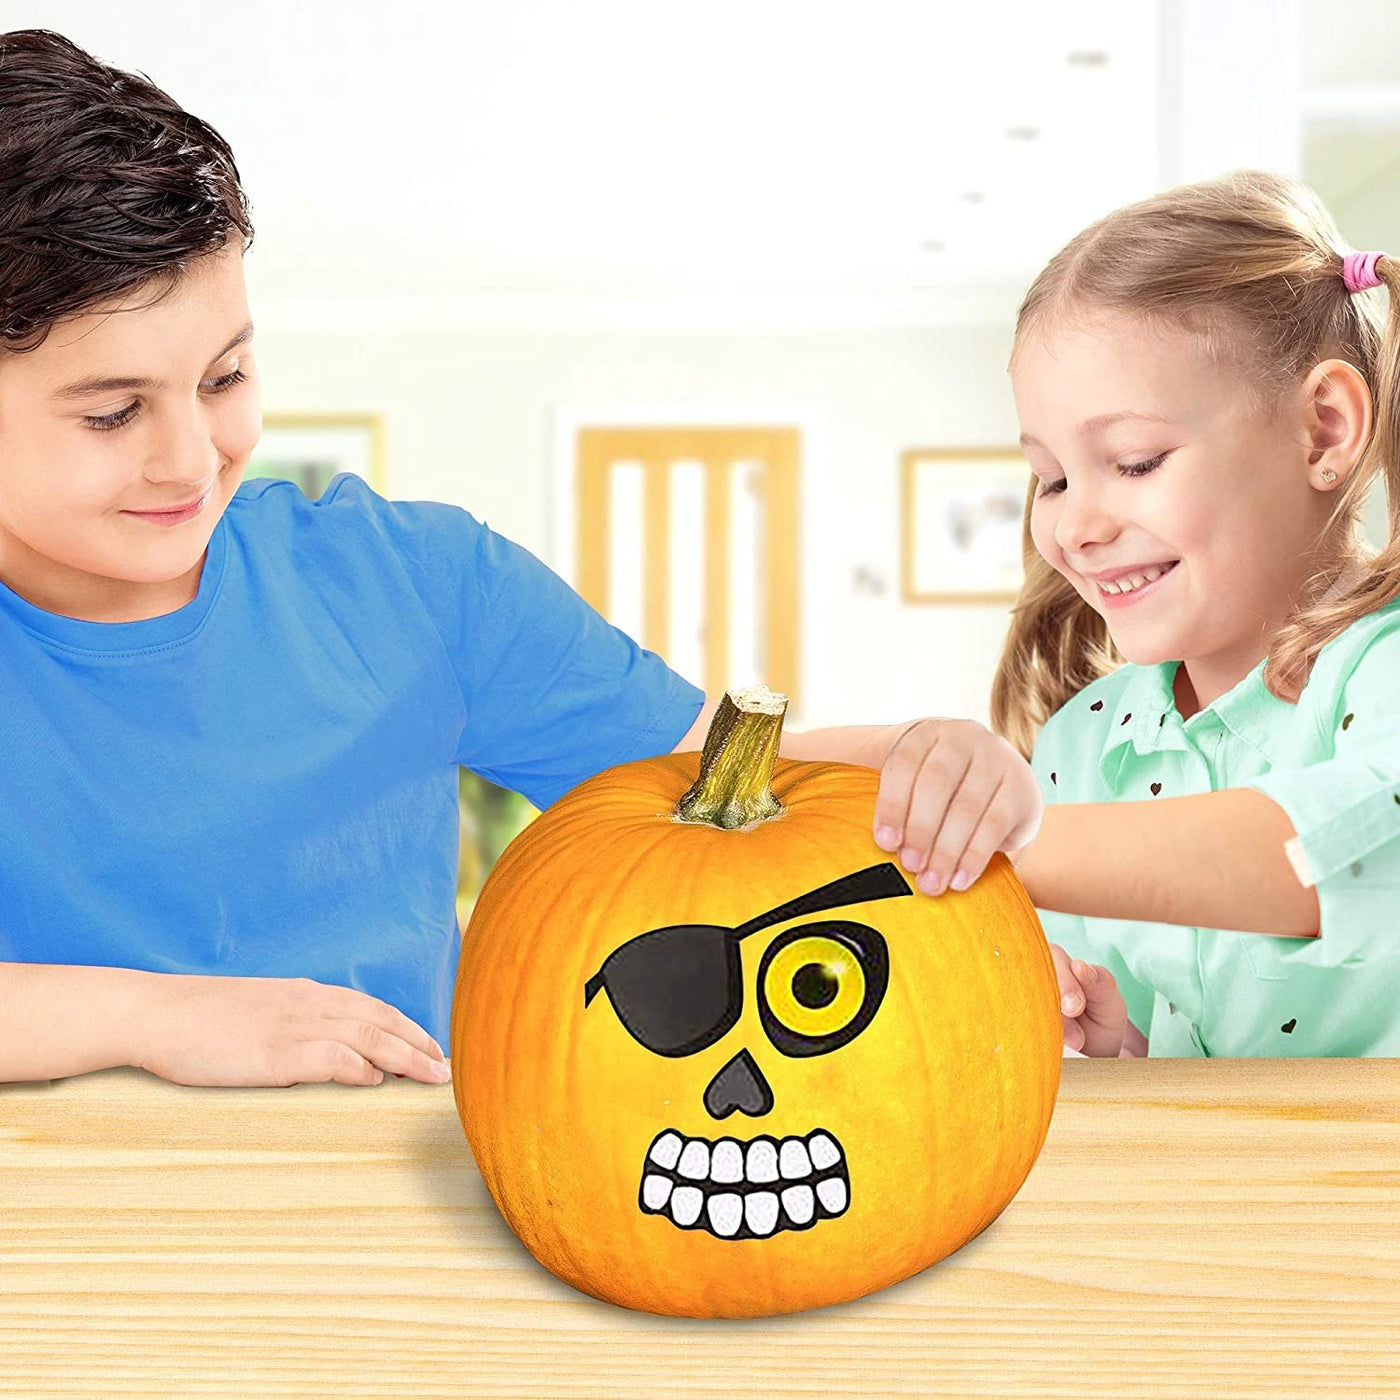 Halloween Pumpkin Decorating Stickers - 12 Large Sheets - Jack-o-Lantern Decoration Kit - 26 Total Face Stickers - Cute Halloween Decor Idea - Treats, Gifts, and Crafts for Kids- 6" x 9"